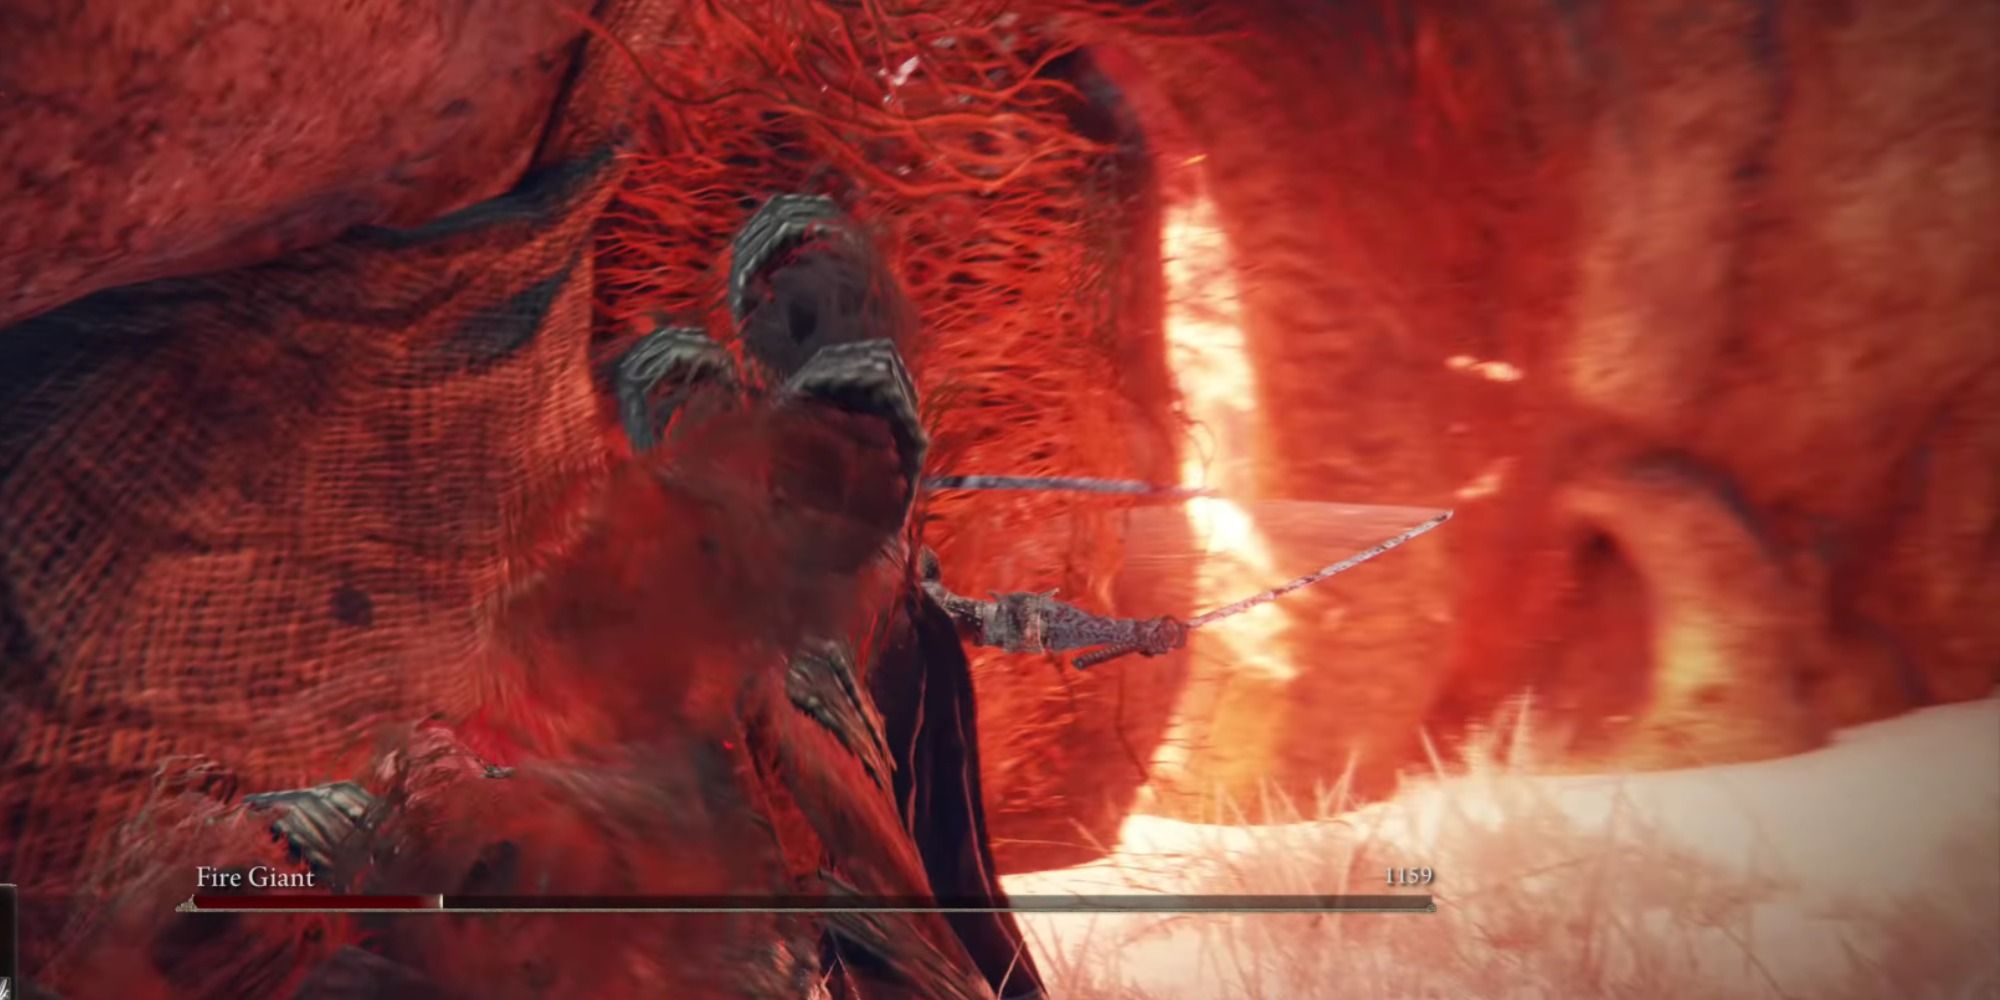 The Fire Giant breathing fire out of its body face after performing an elbow drop in Elden Ring